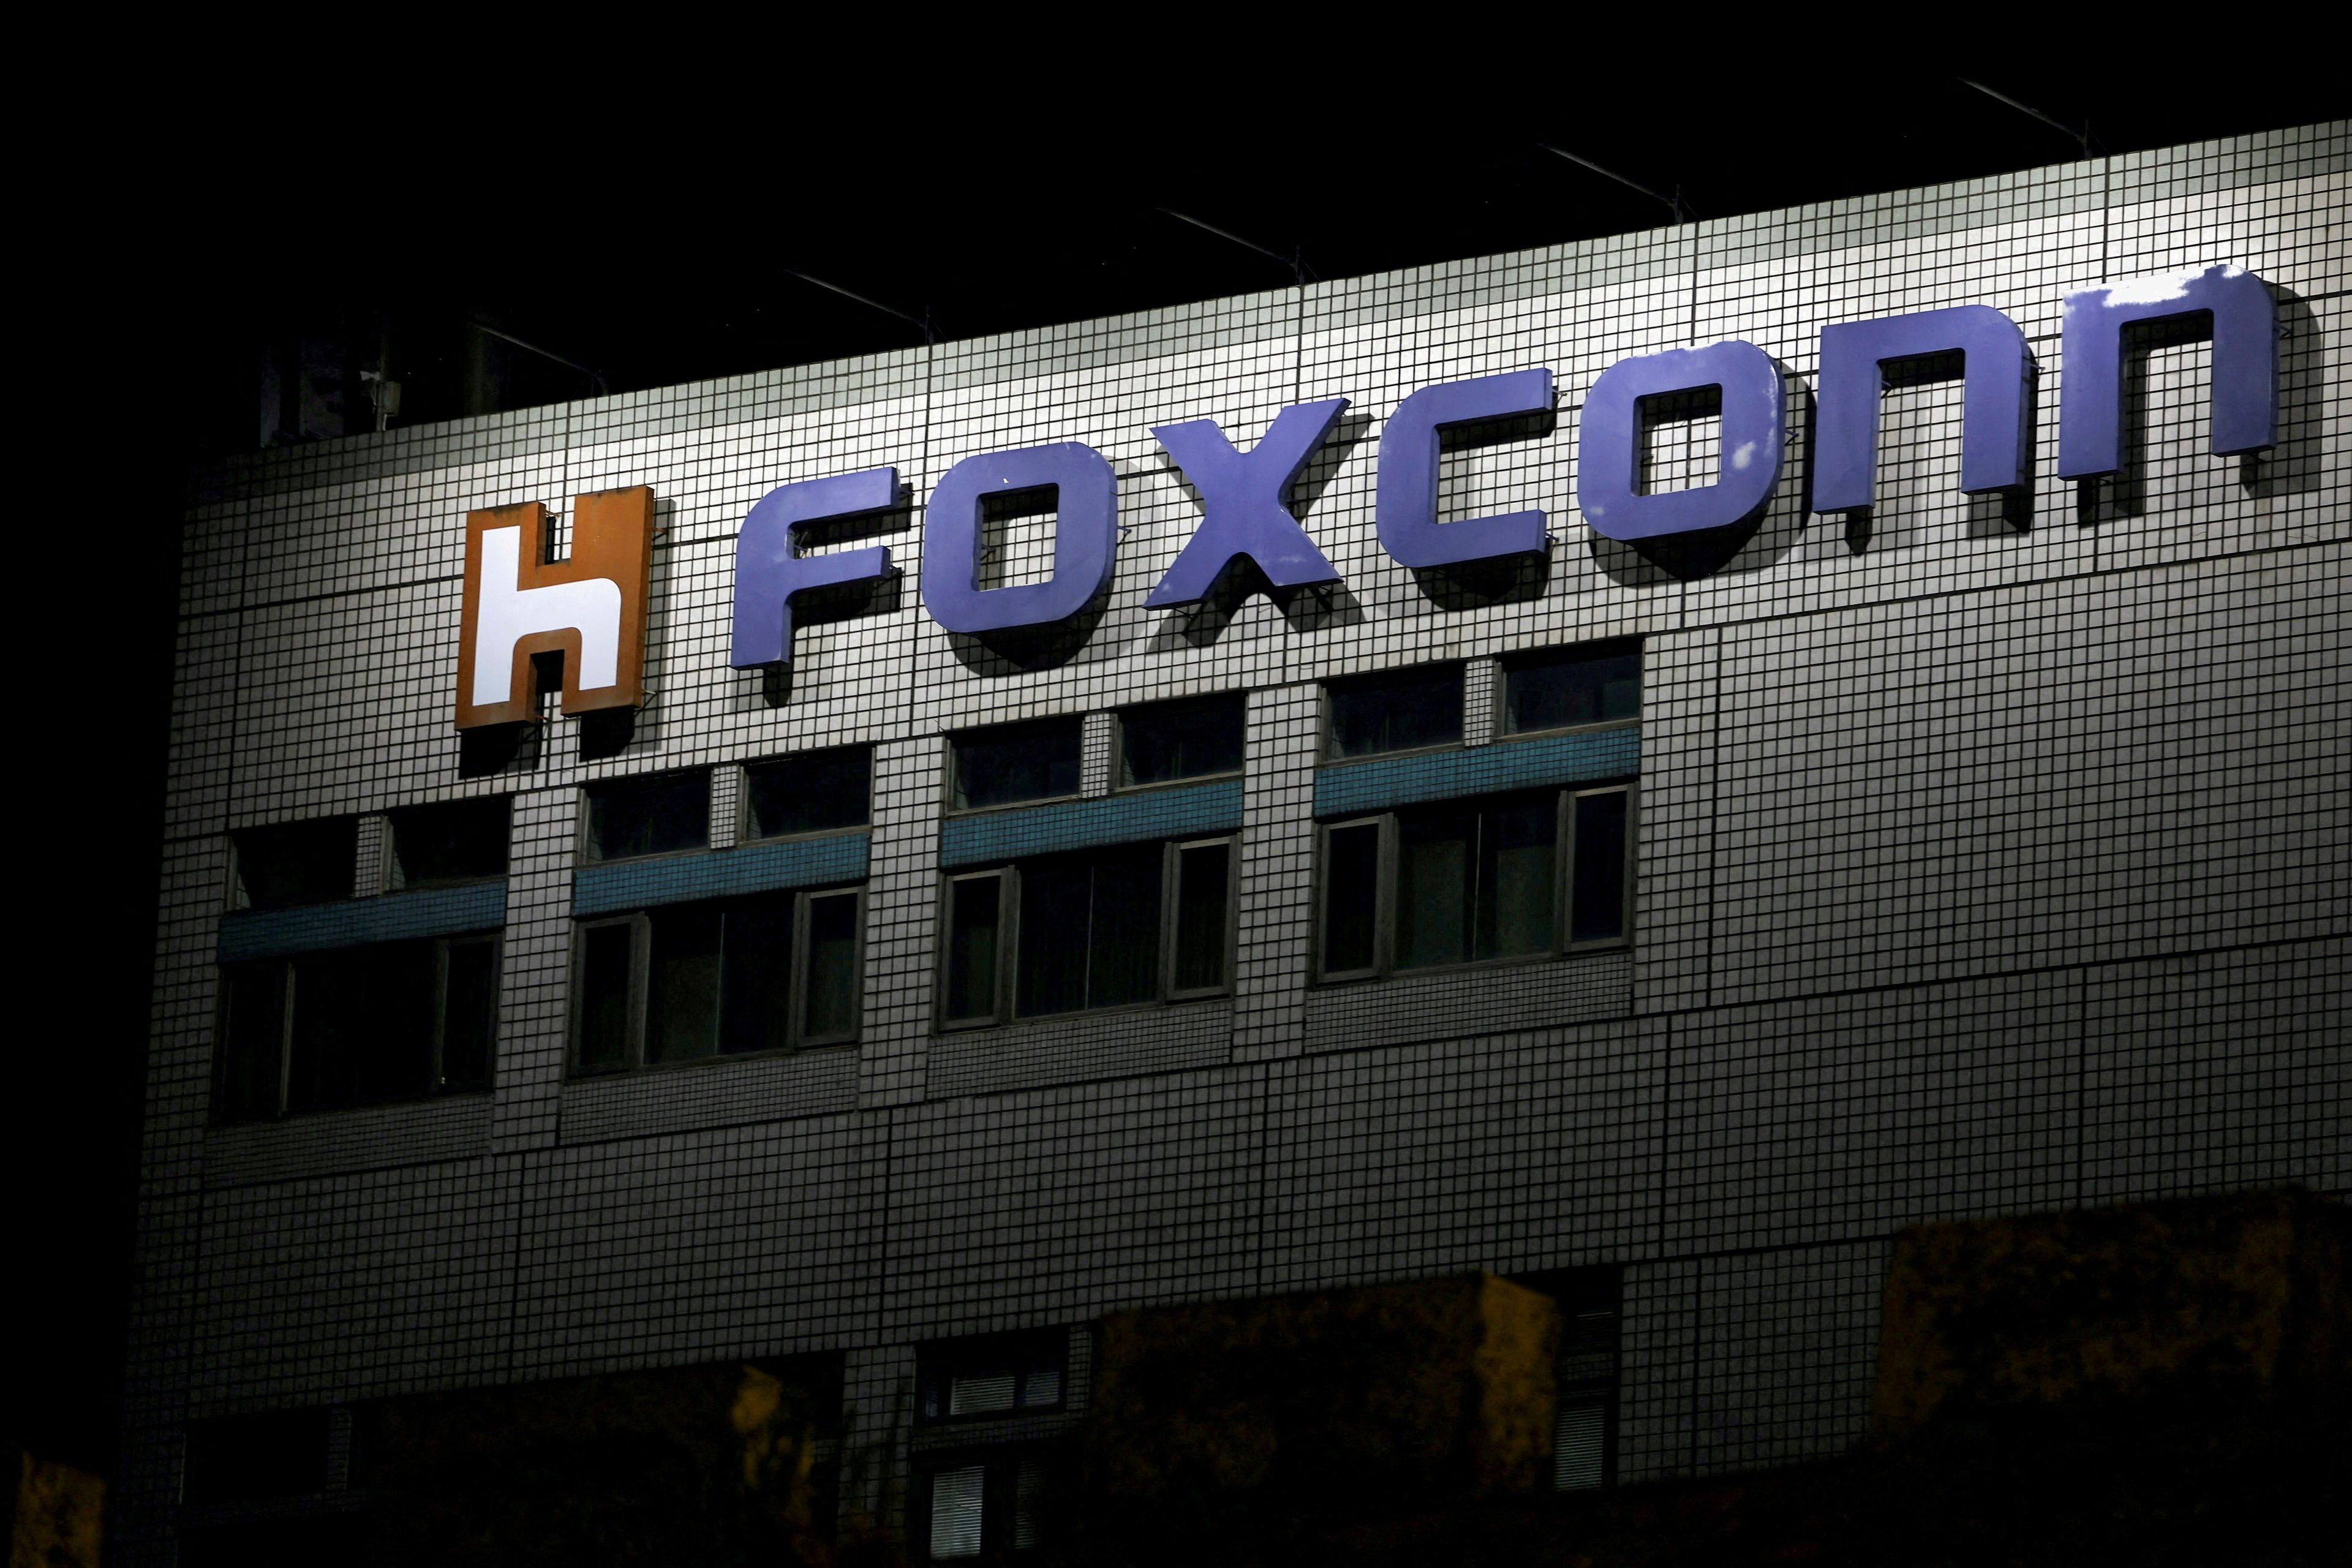 The logo of Foxconn is seen outside a company's building in Taipei, Taiwan